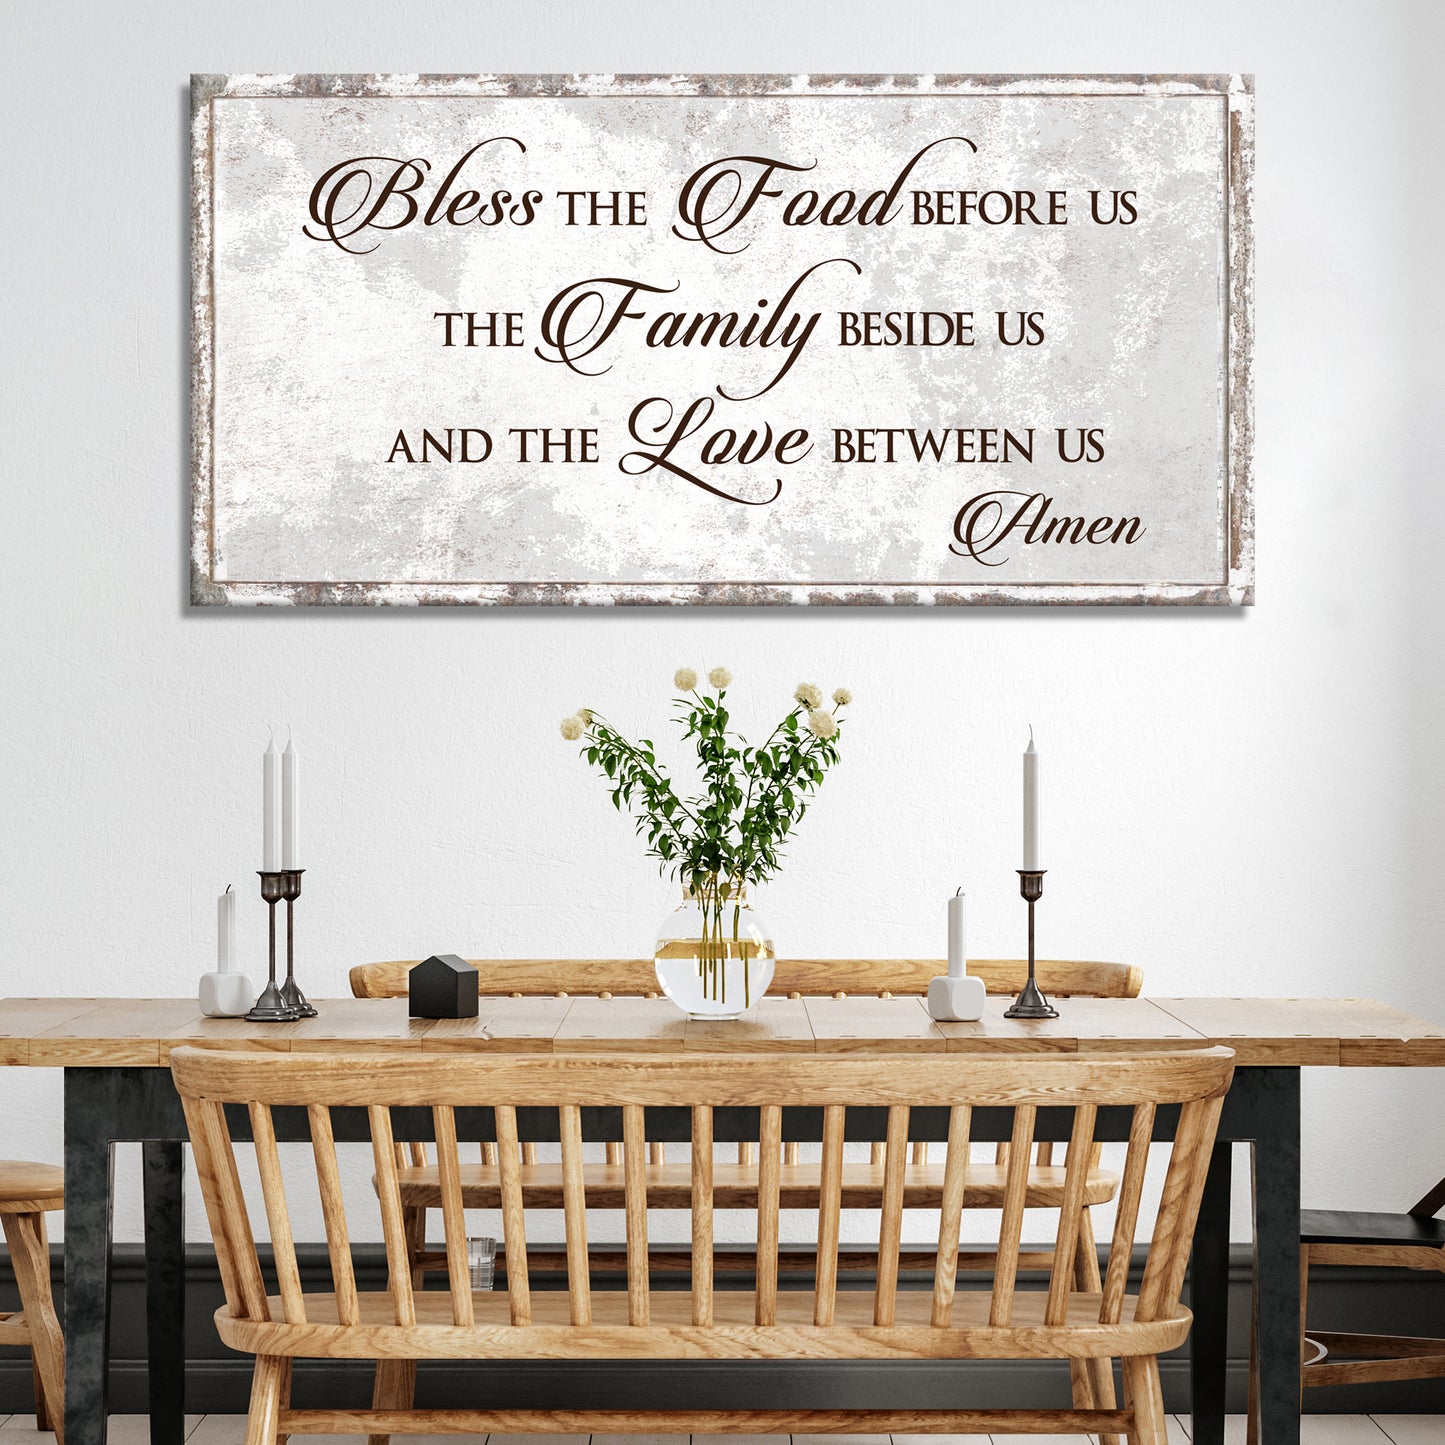 Bless Our Food, Family, and Love Sign - Image by Tailored Canvases